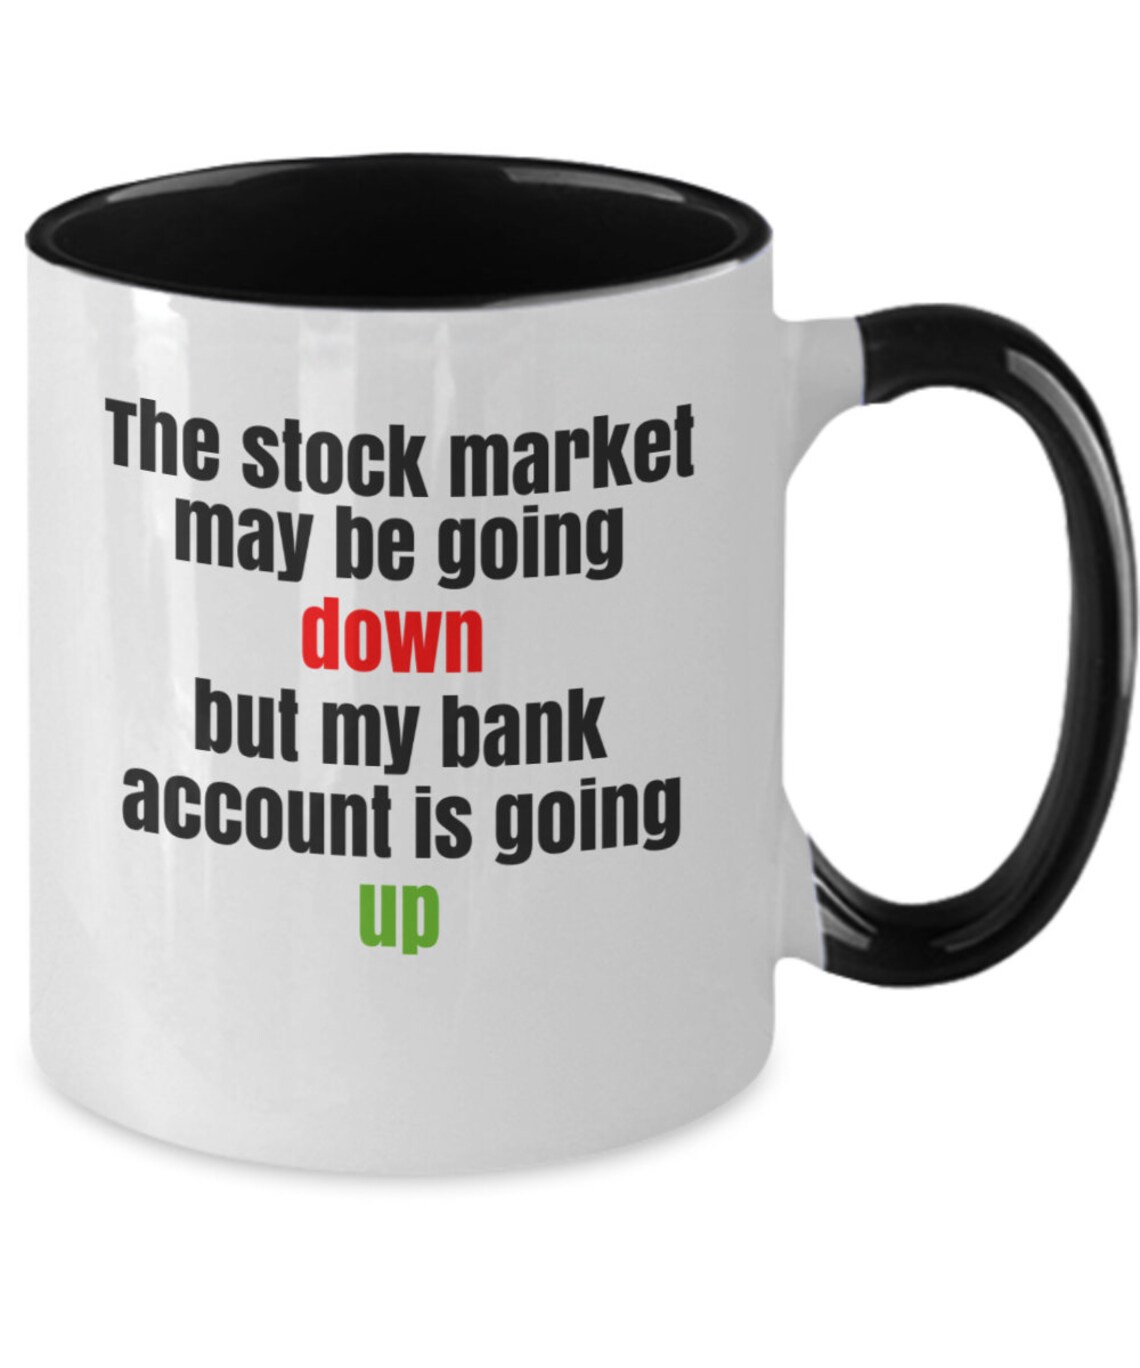 Funny stock market gift mug brokers gift for day traders